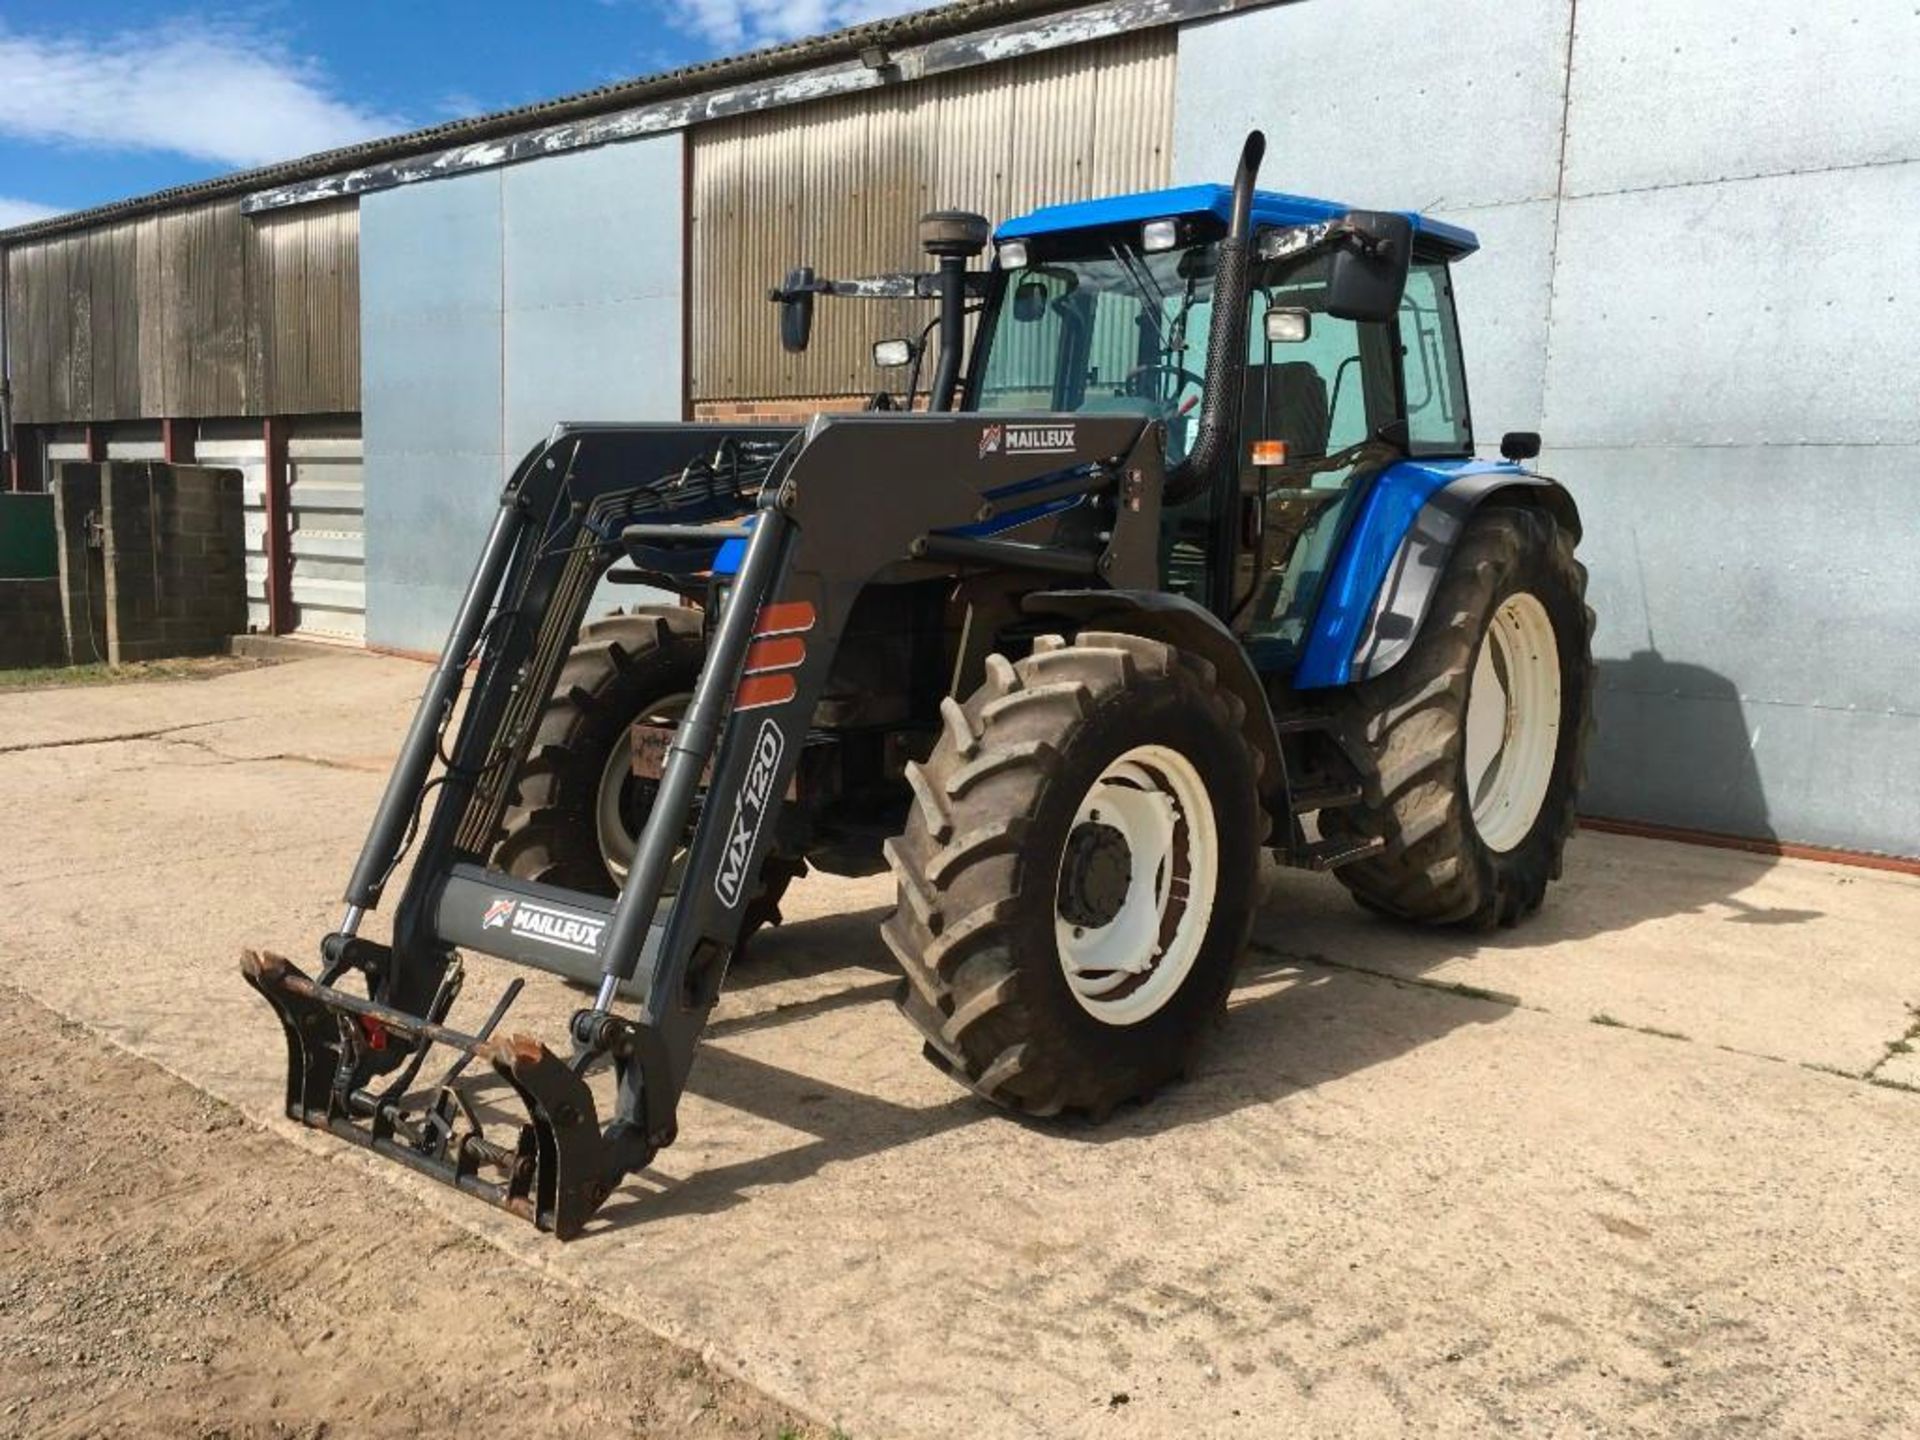 2003 New Holland TS115 tractor with Mailleux MX120 front loader. 2 spool valves, rear link arms and